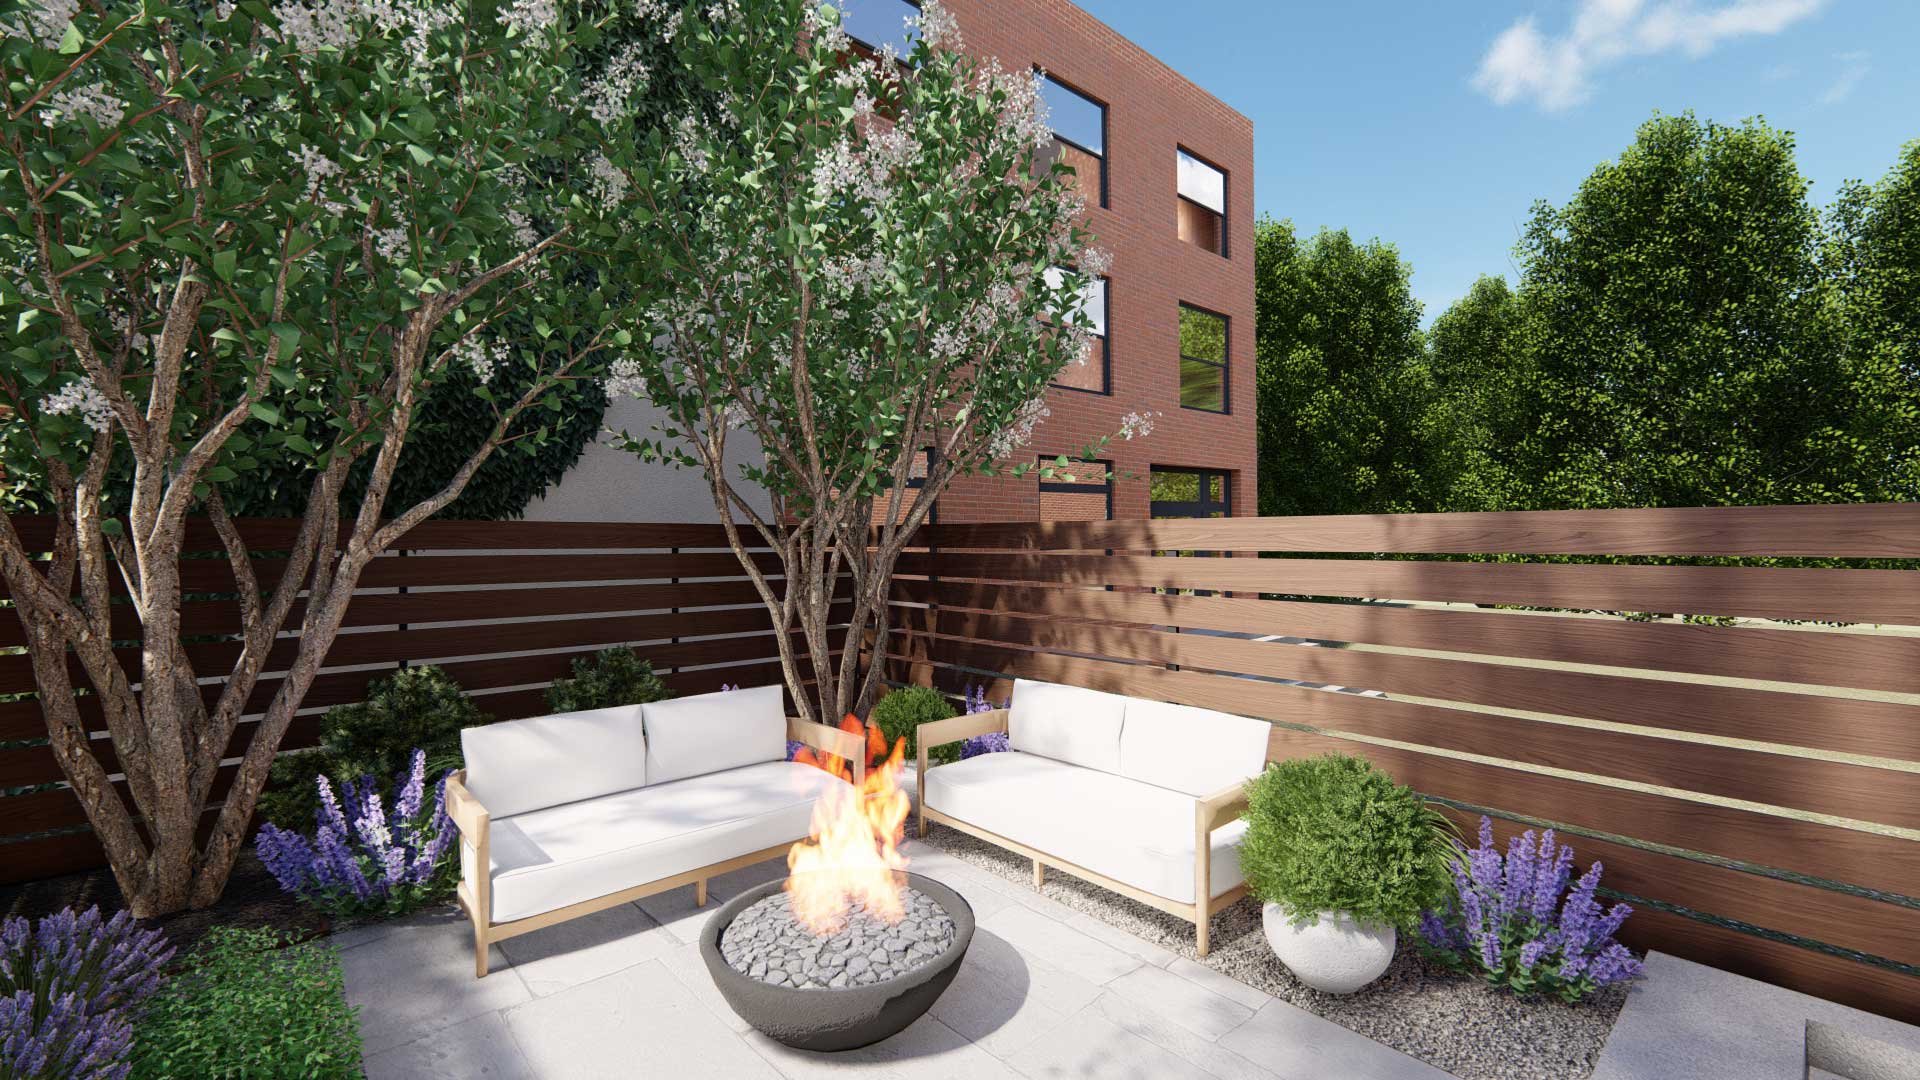 Fast growing Crape Myrtle are heat tolerant, low maintenance, and provide multi-season interest in this New York City back yard design